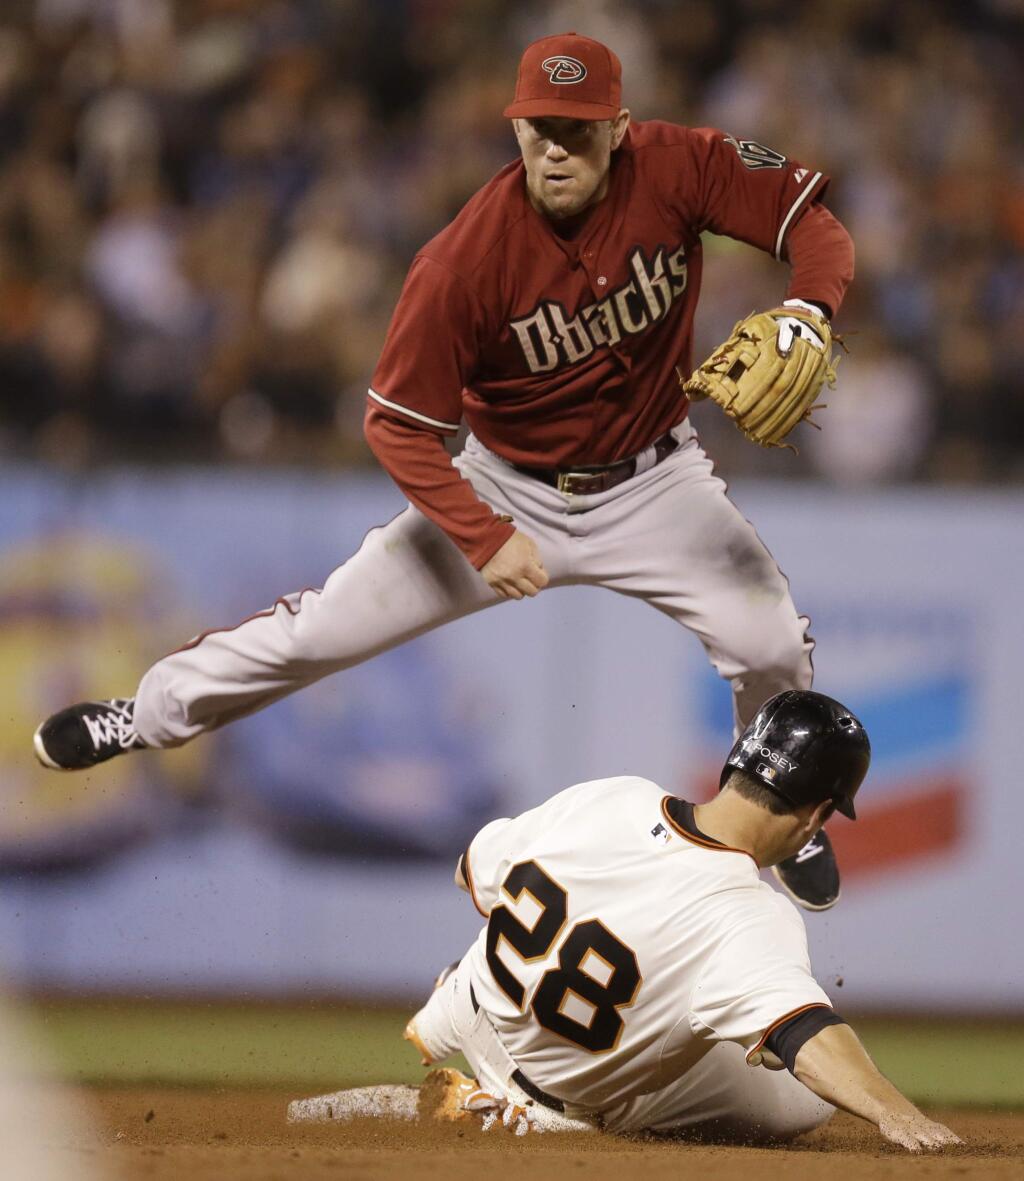 Arizona Diamondbacks' Aaron Hill hops over San Francisco Giants' Buster Posey (28) after a throw to first base for a double play in the sixth inning of a baseball game Wednesday, Sept. 10, 2014, in San Francisco. Pablo Sandoval was out at first base. (AP Photo/Ben Margot)